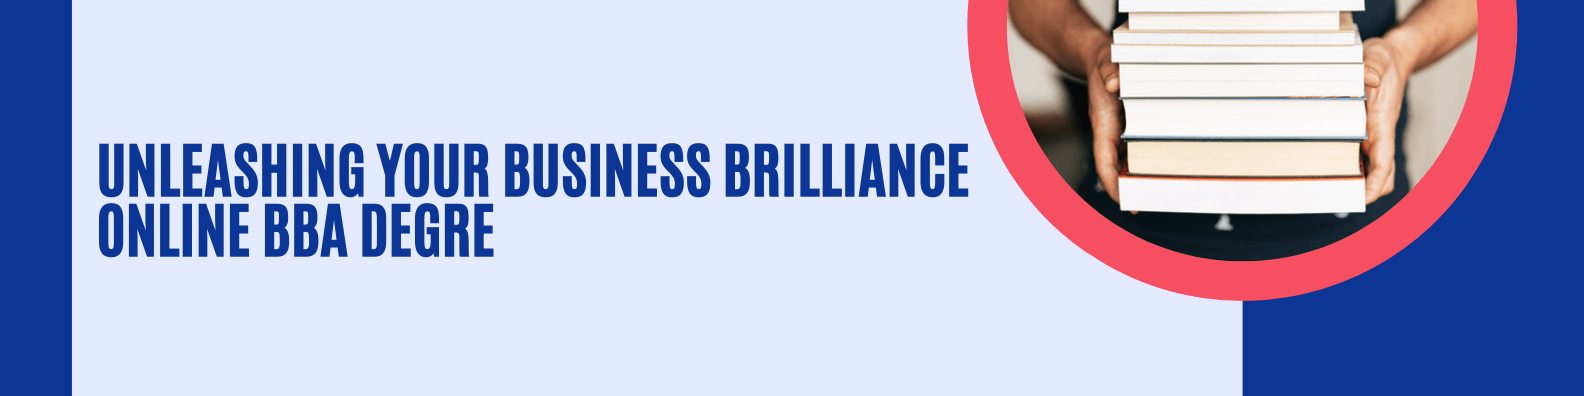 Unleashing Your Business Brilliance Online BBA Degree-min